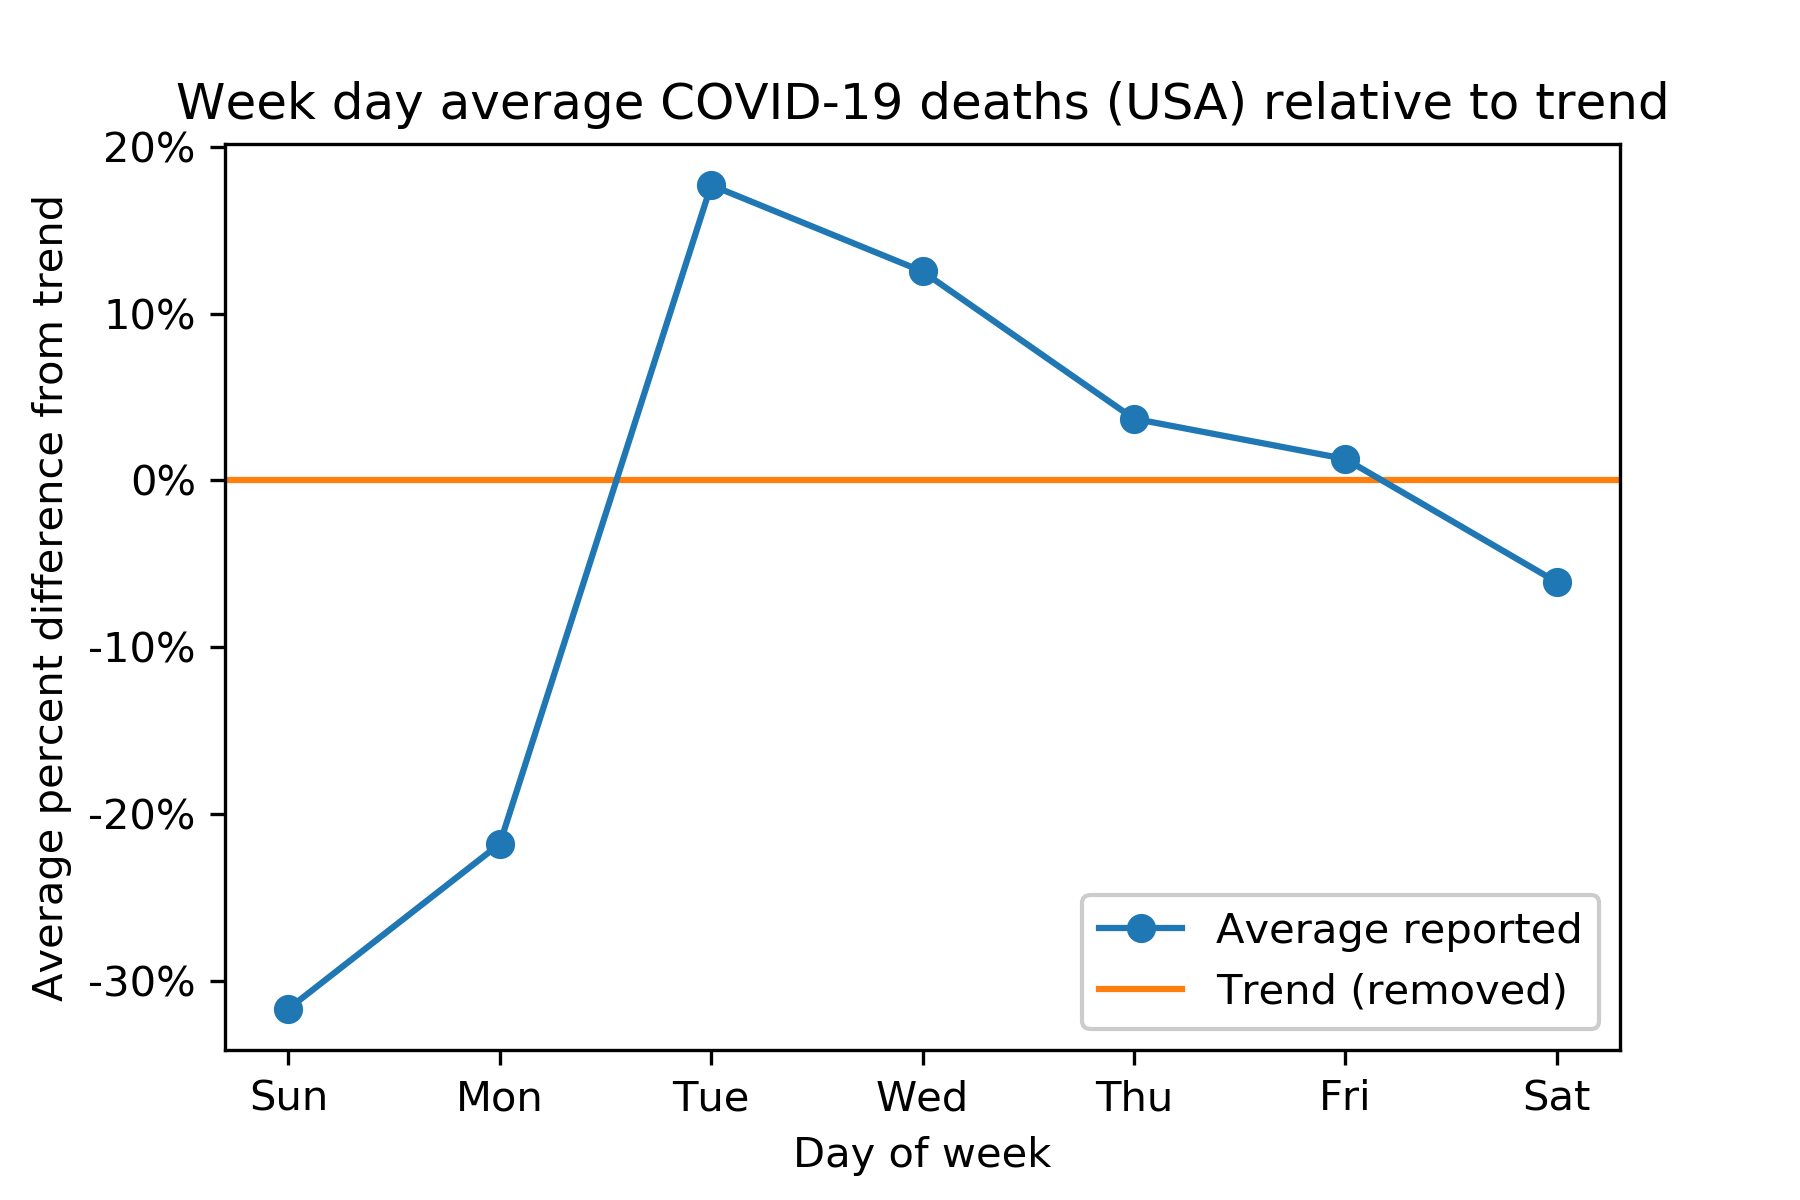 Week day average COVID-19 deaths (USA) relative to trend (percentage)